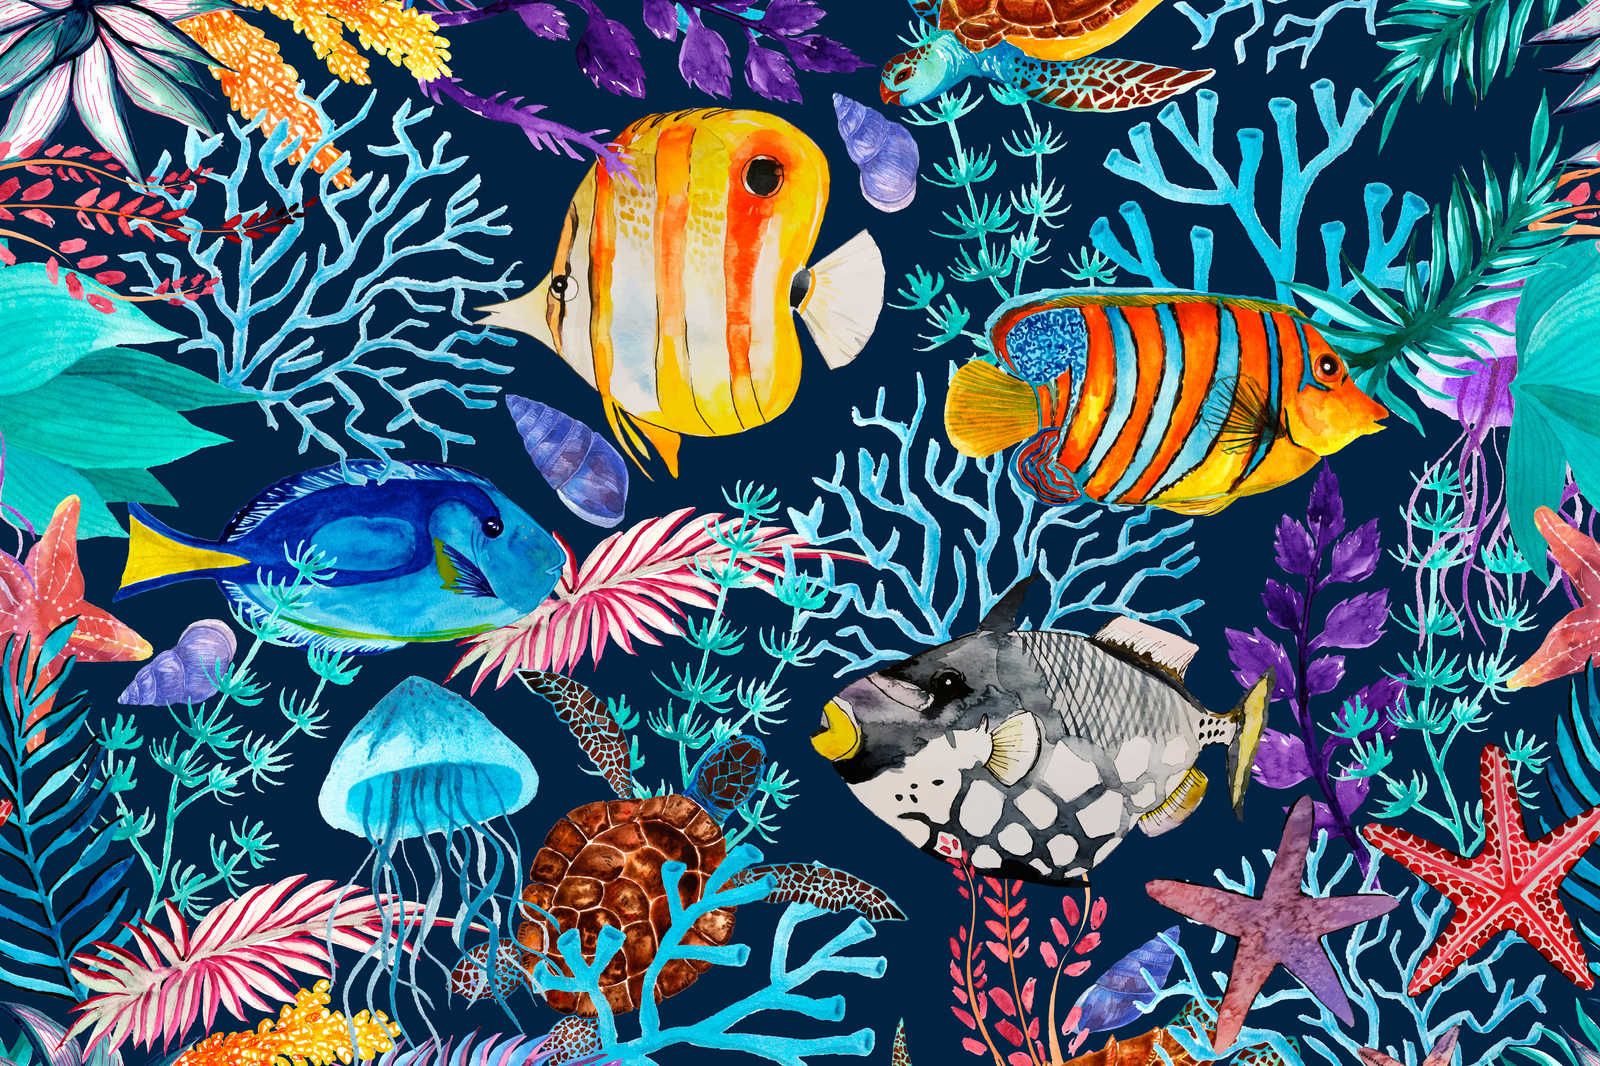             Underwater Canvas Painting with Colourful Fish & Starfish - 0.90 m x 0.60 m
        